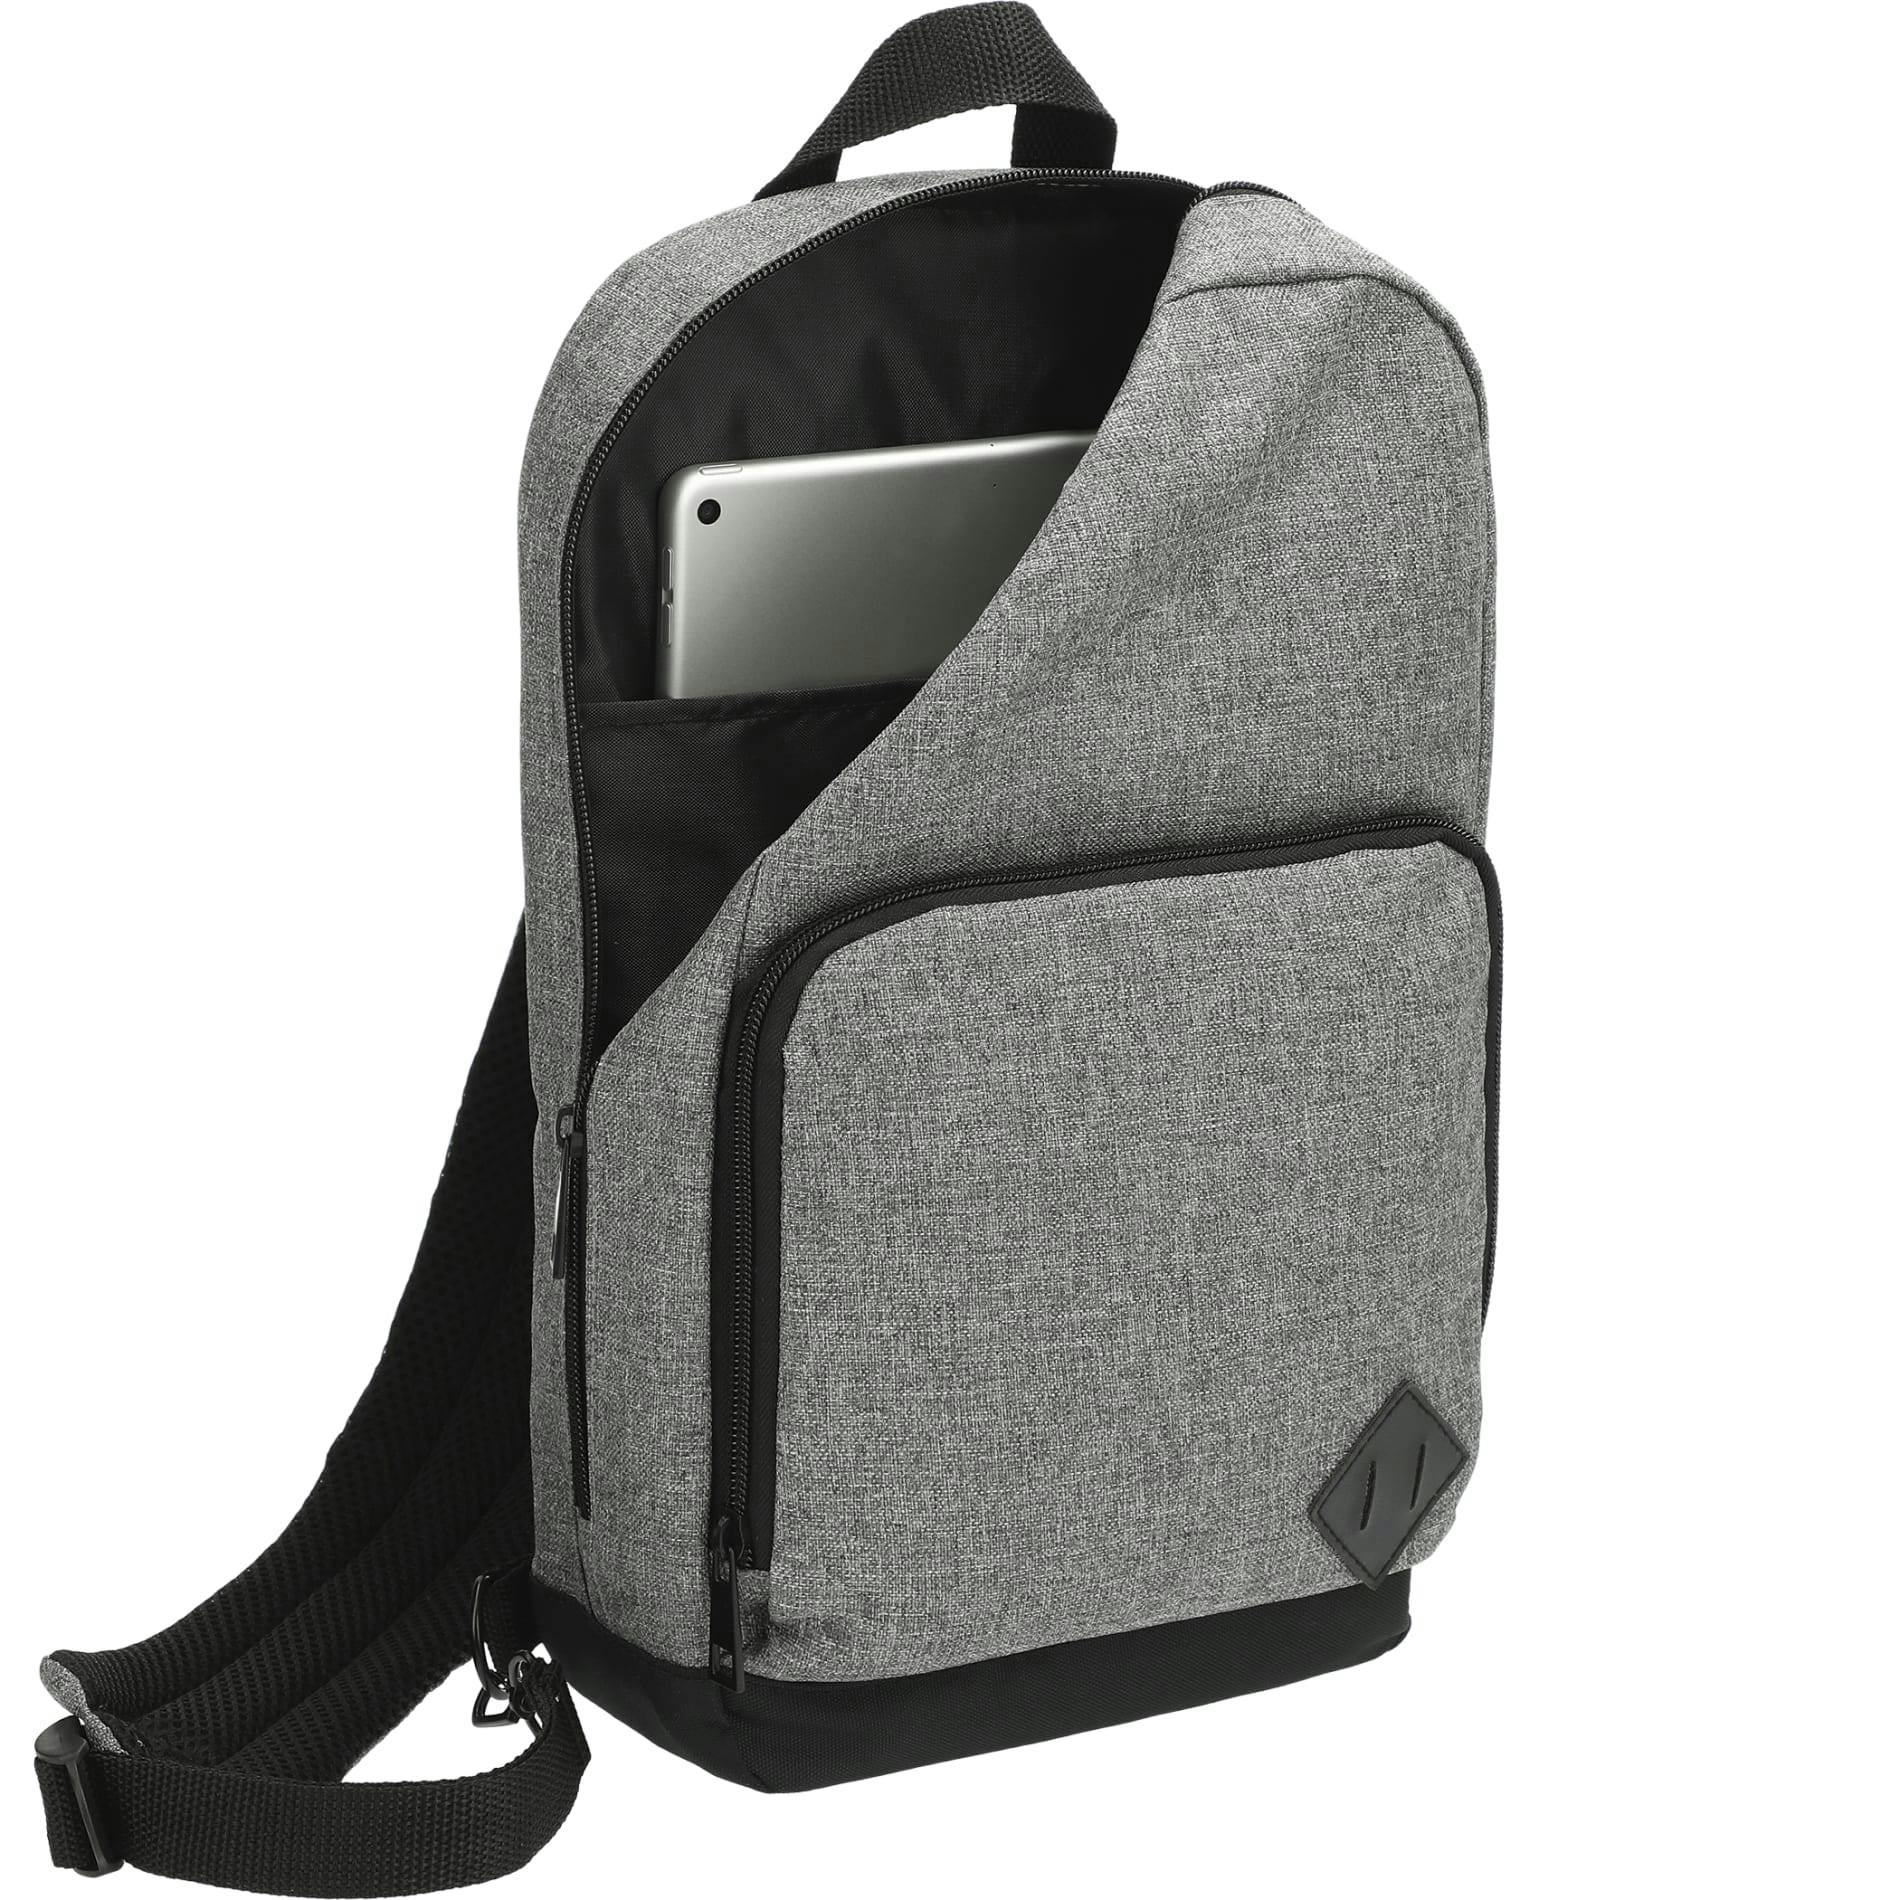 Graphite Deluxe Recycled Sling Backpack - additional Image 2